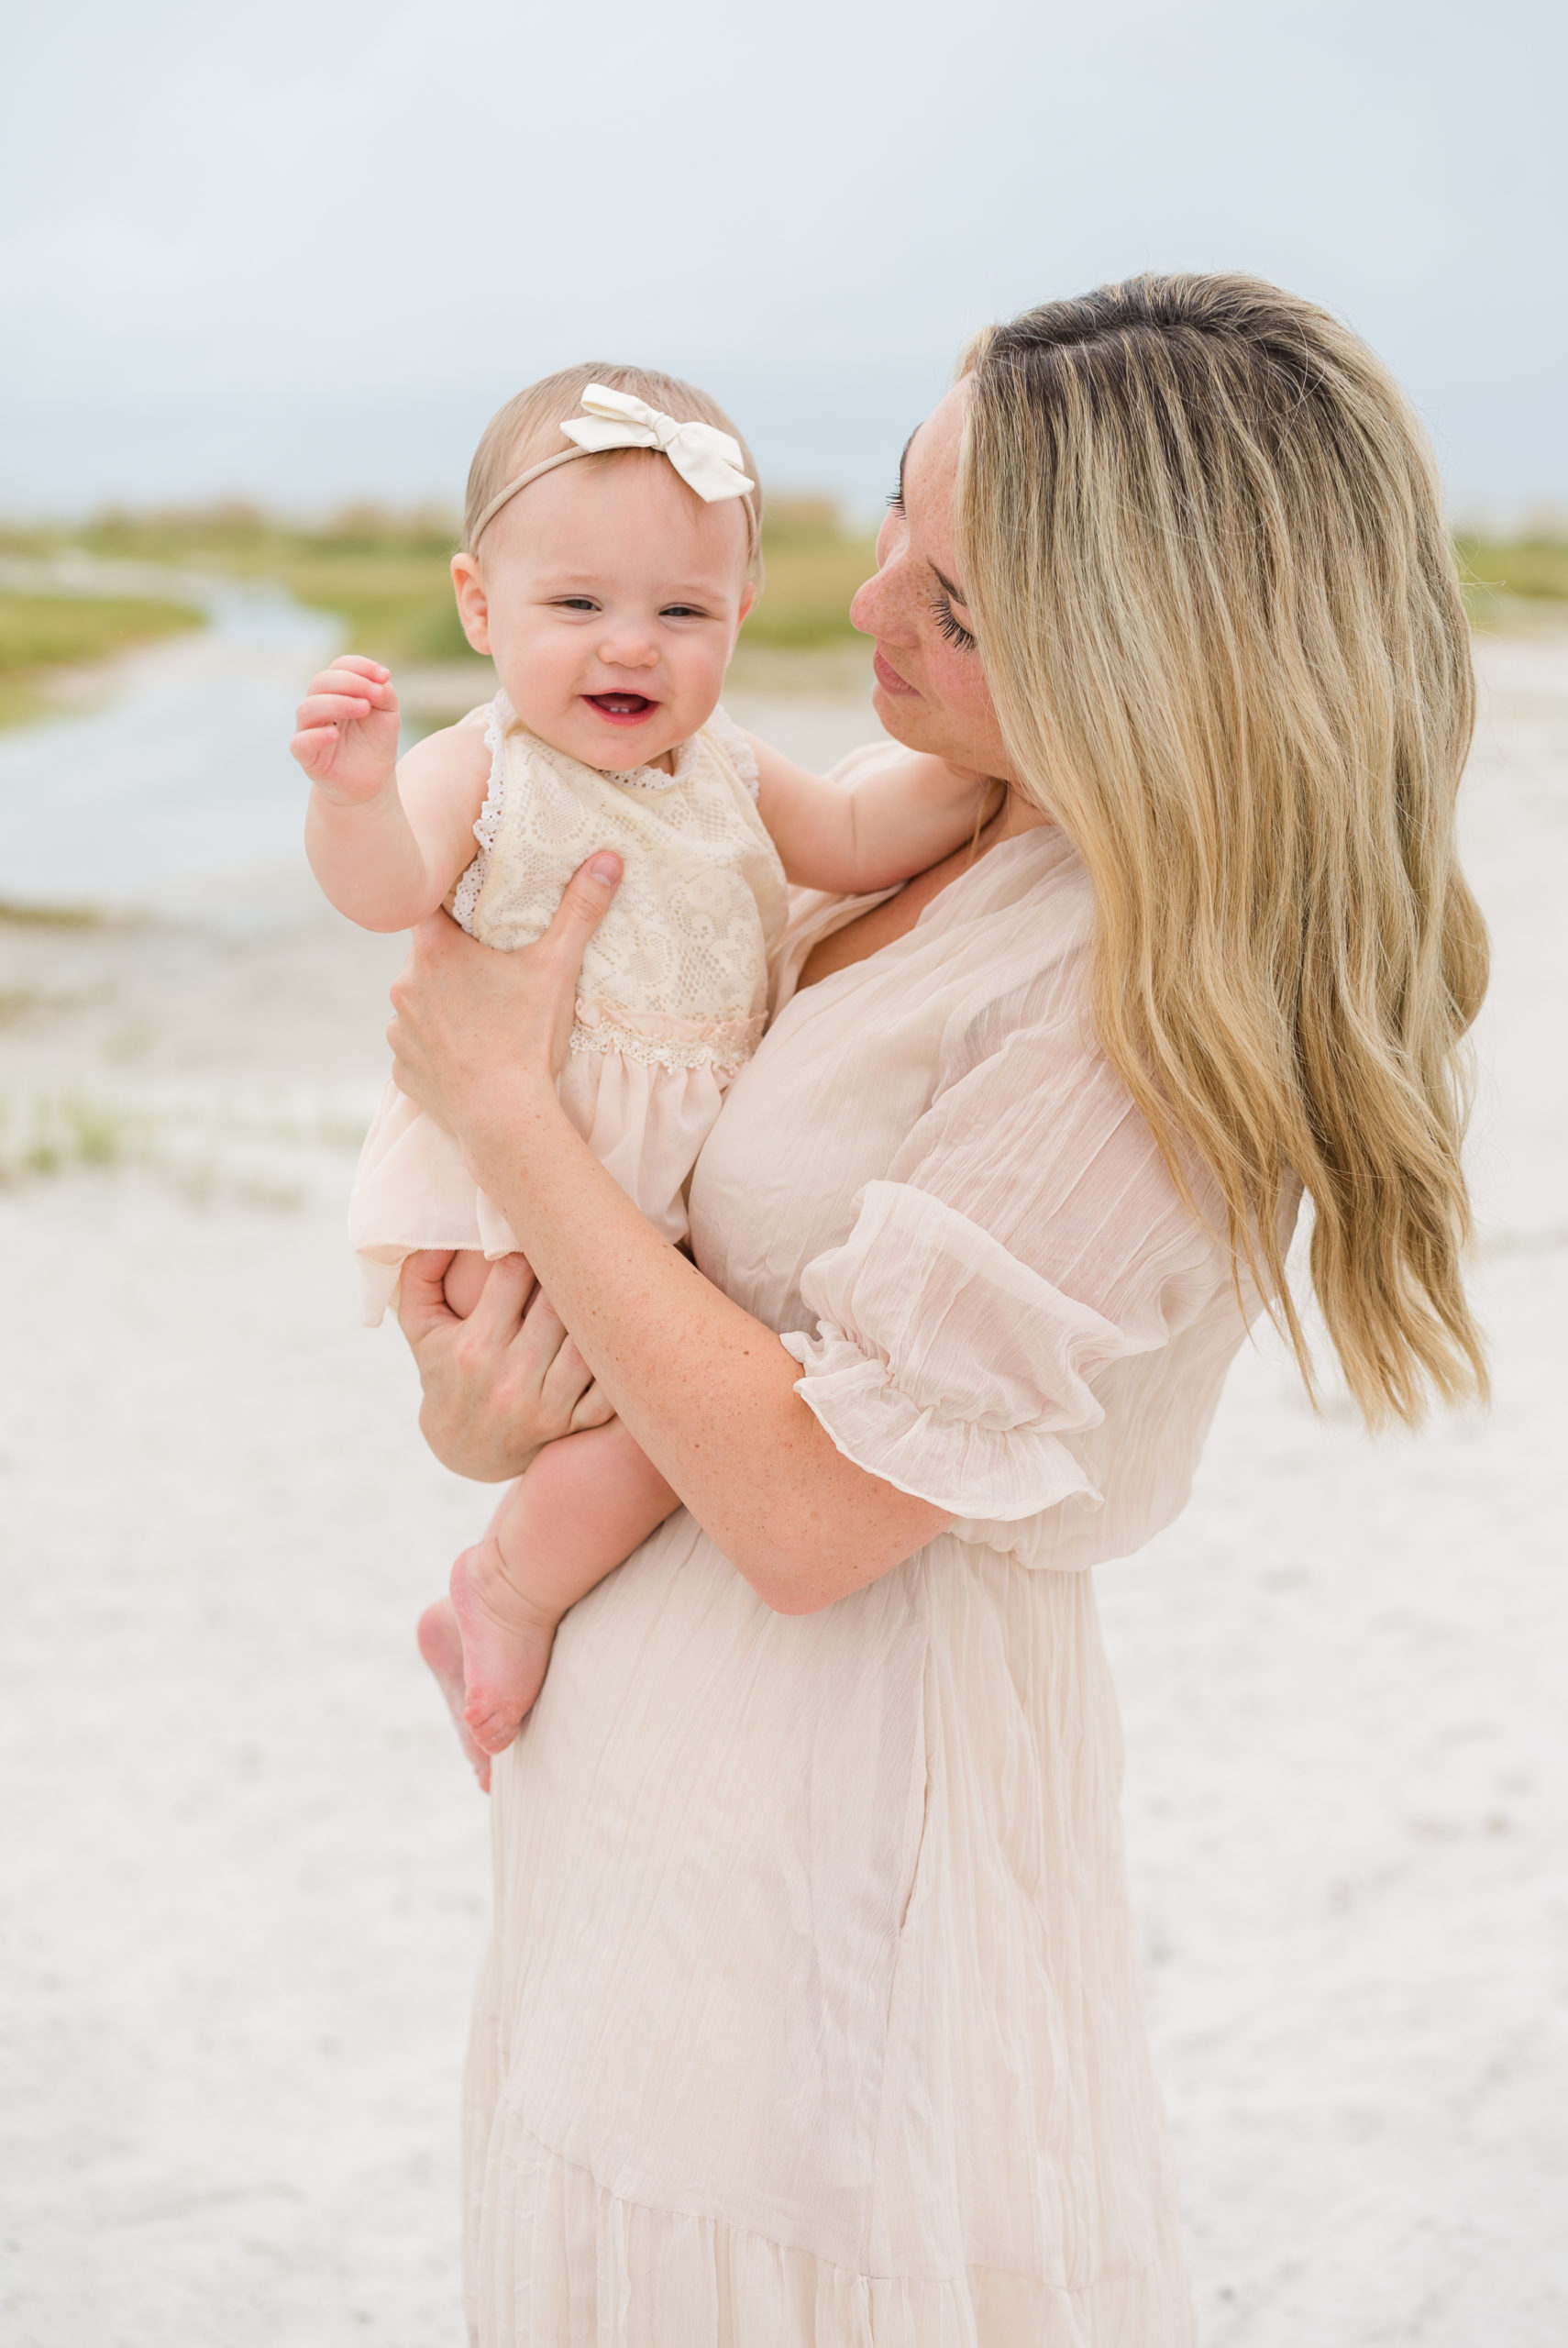 Olivia 9 Months Old - Sweet Williams Photography is a lifestyle, engagement, and wedding photographer serving the Nashville, Tennessee area, and destination locations.